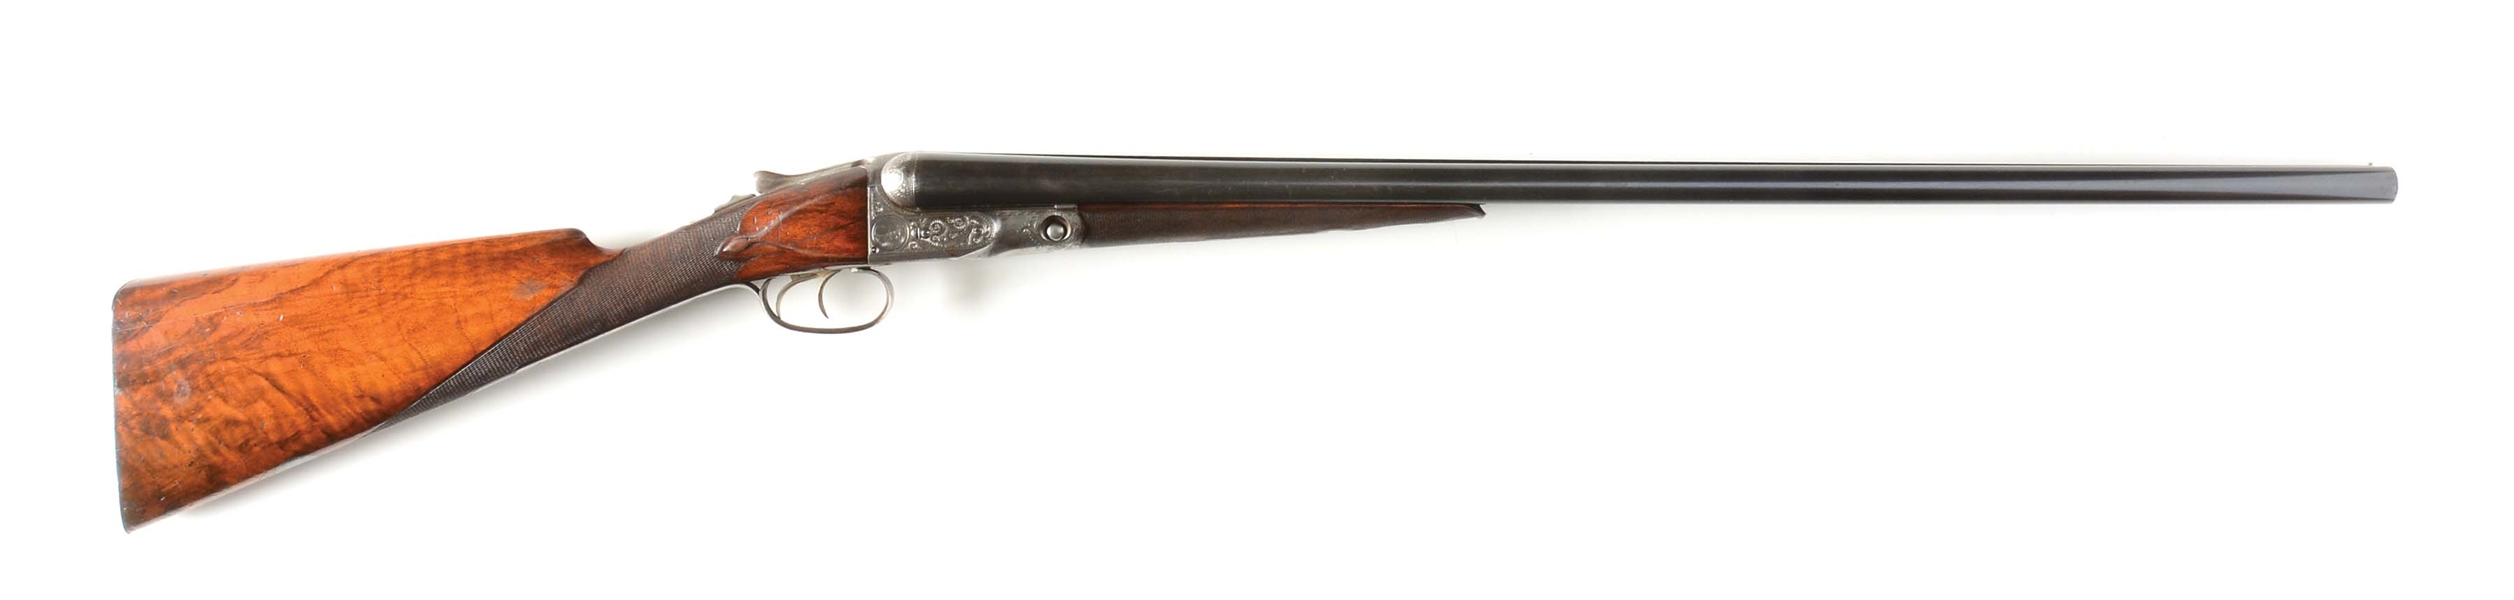 (C) PARKER BROS. "CHE" SHOTGUN WITH UNUSUAL ENGRAVING PATTERN AND STRAIGHT GRIP STOCK.